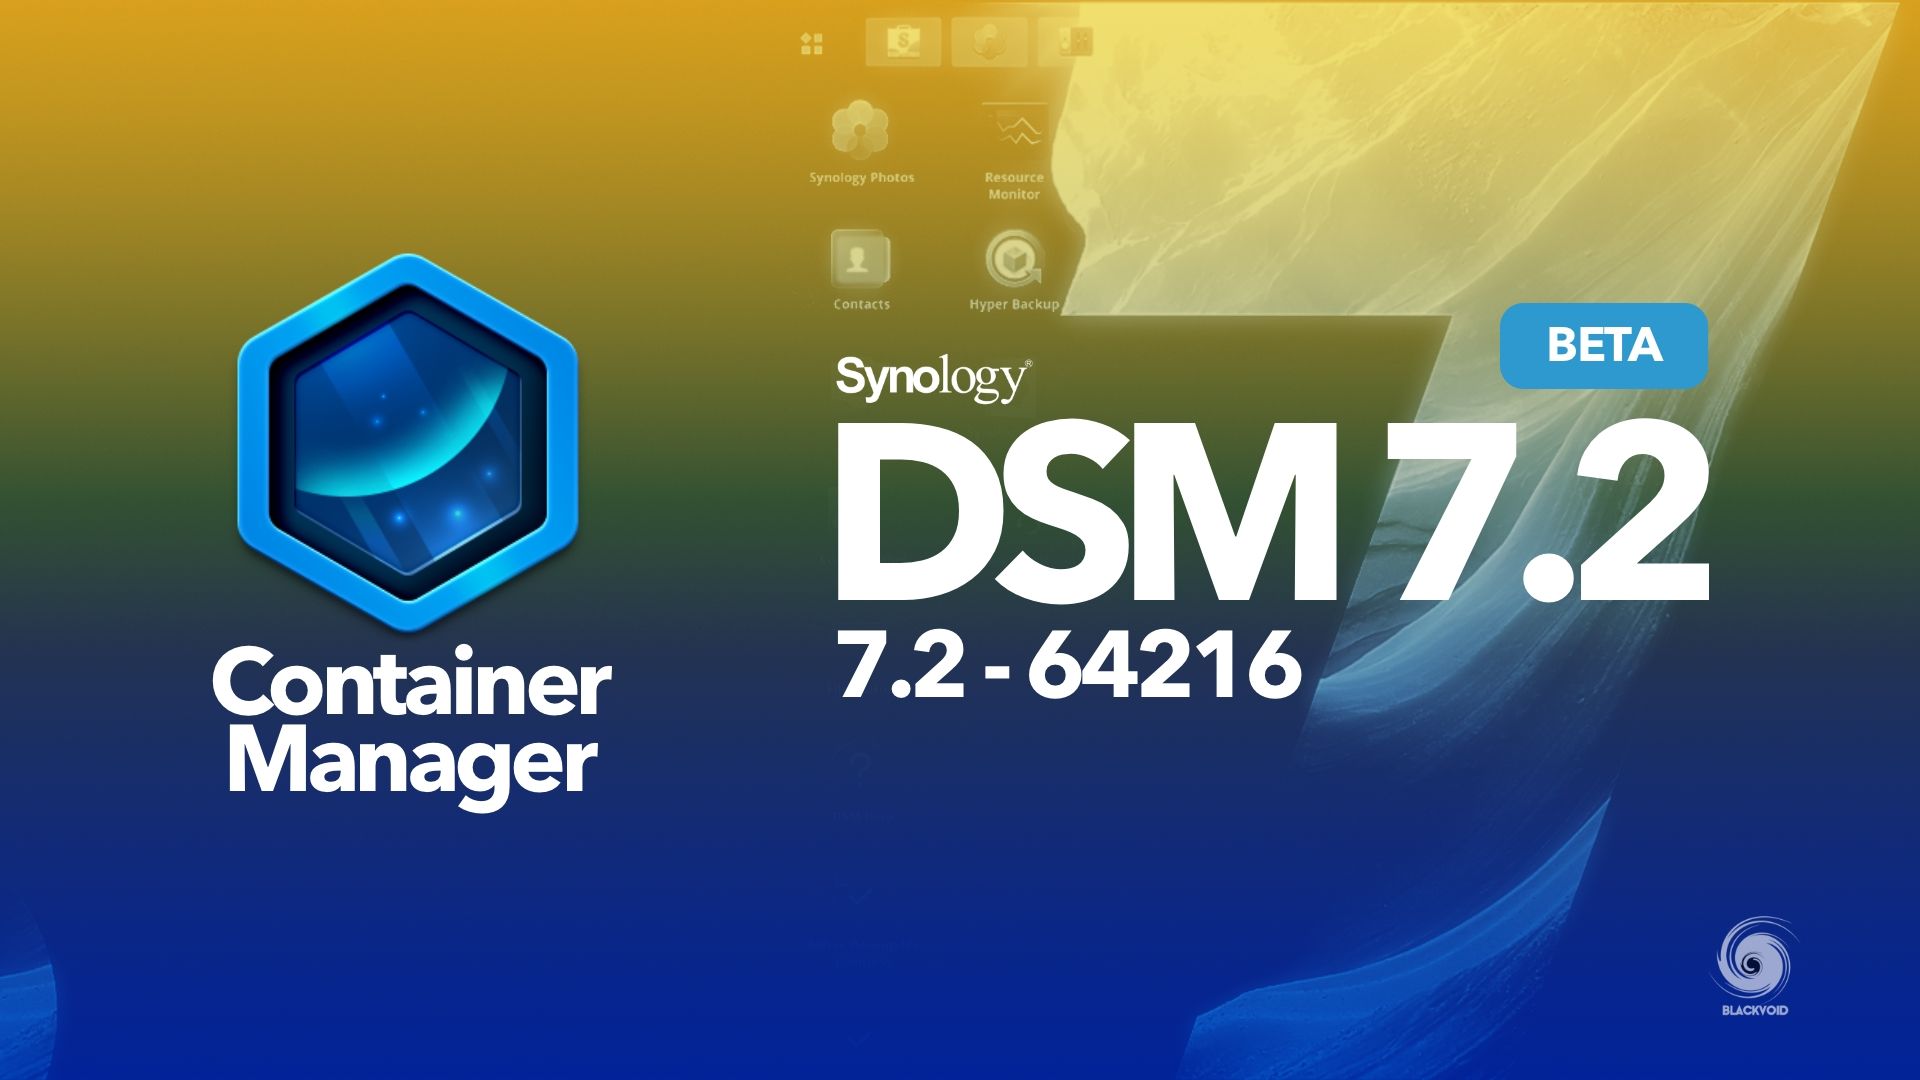 Synology DS223 overview